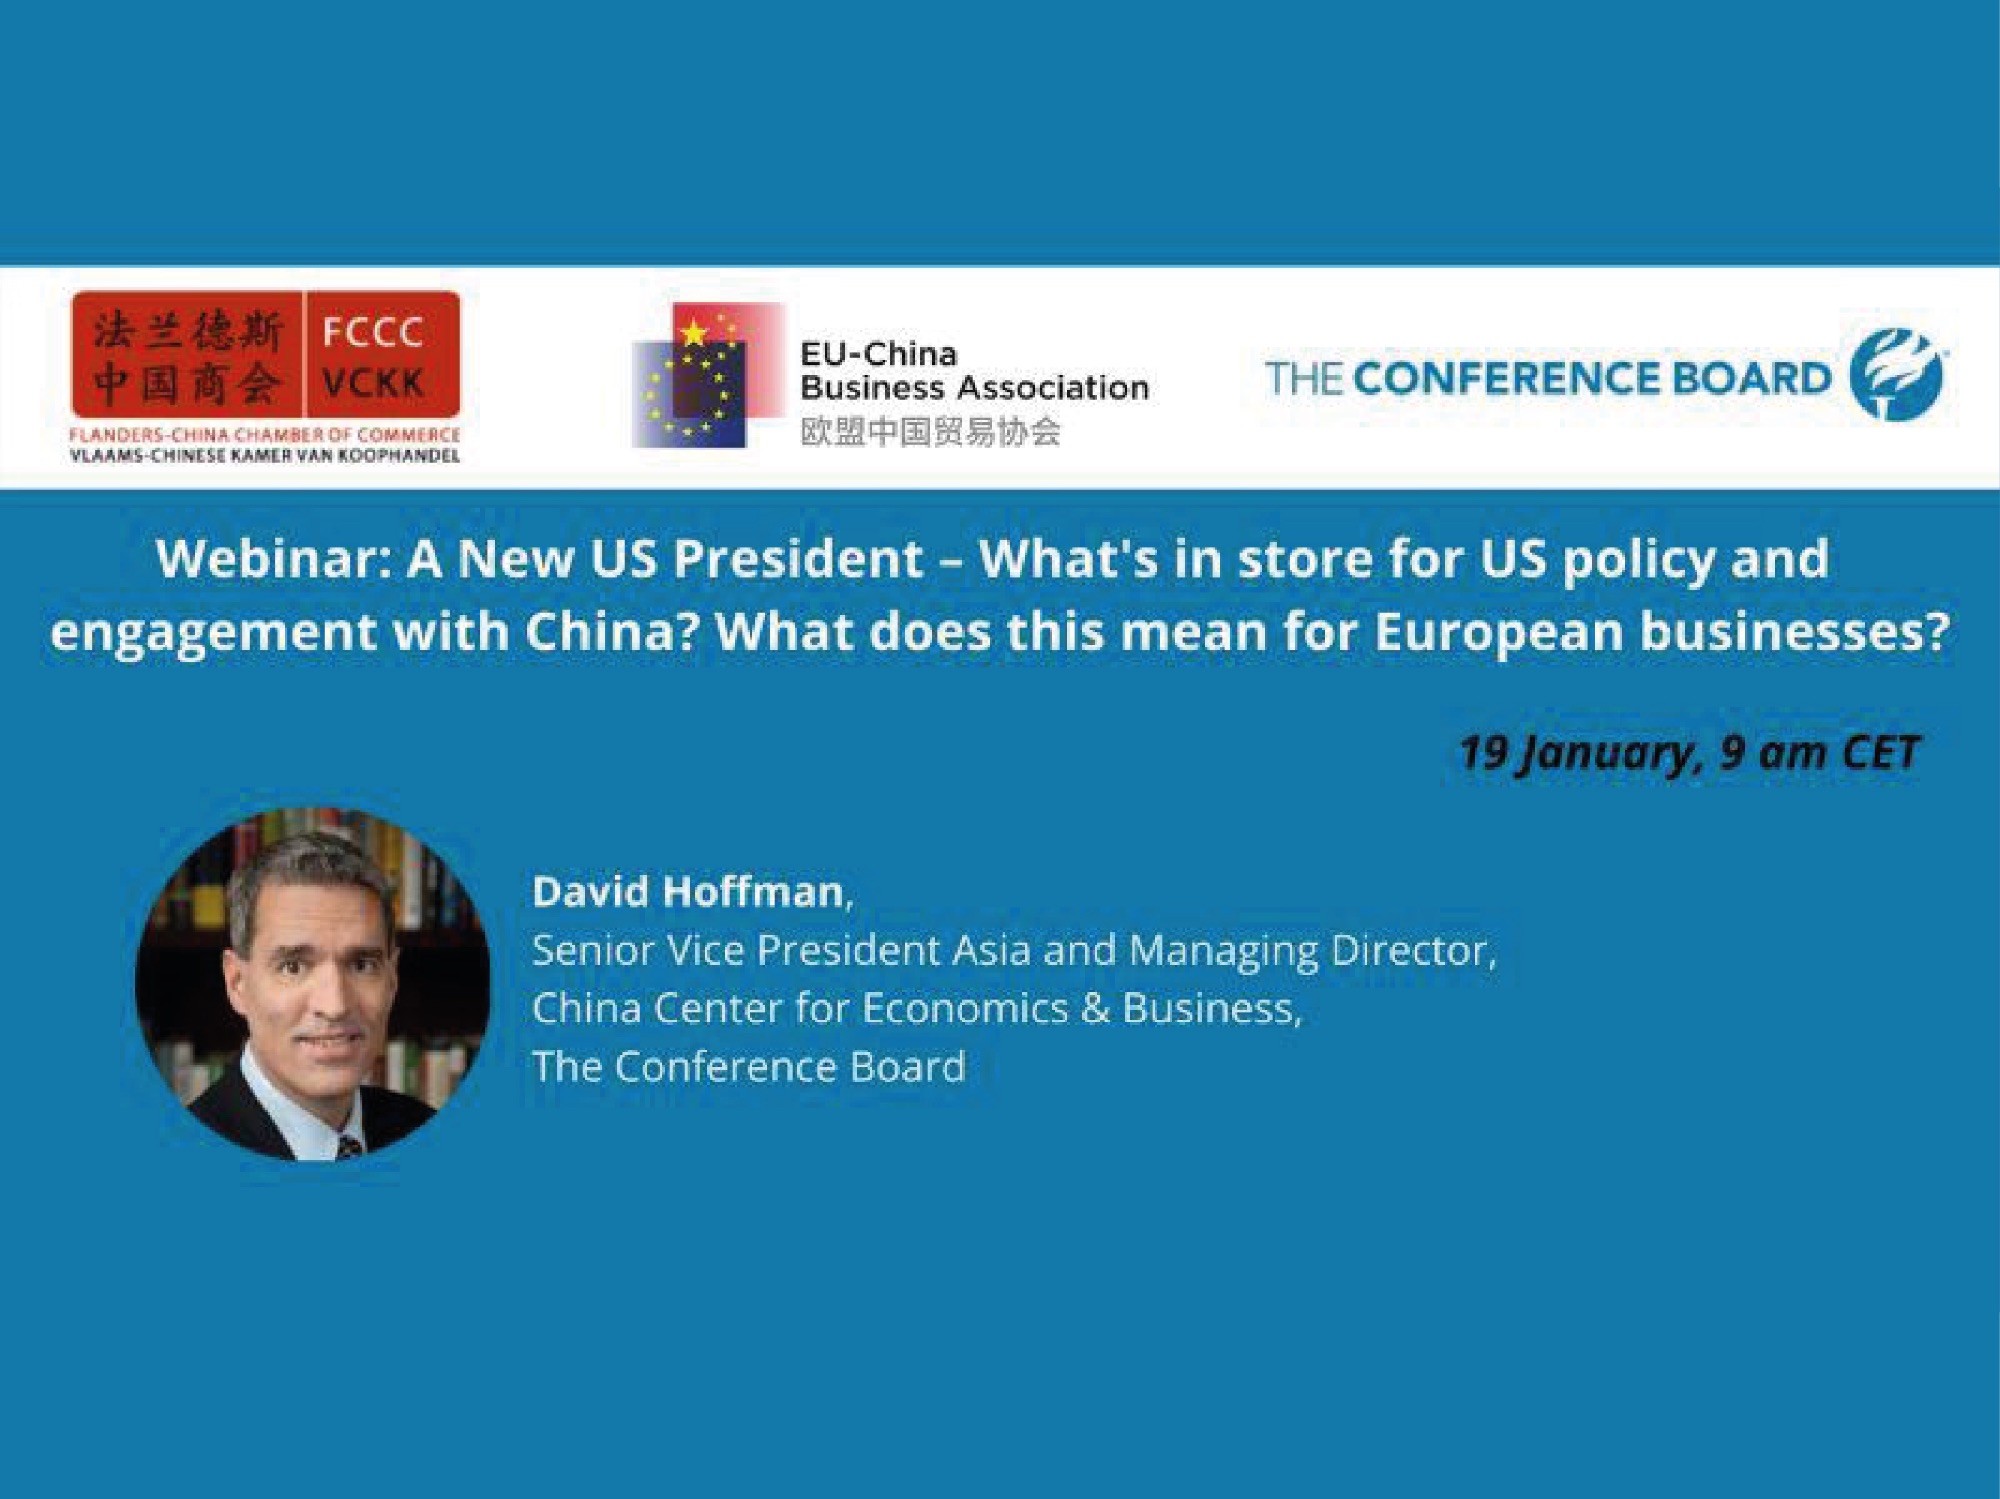 Webinar: A New US President - What's in store for US policy and engagement with China? What does this mean for European Businesses?